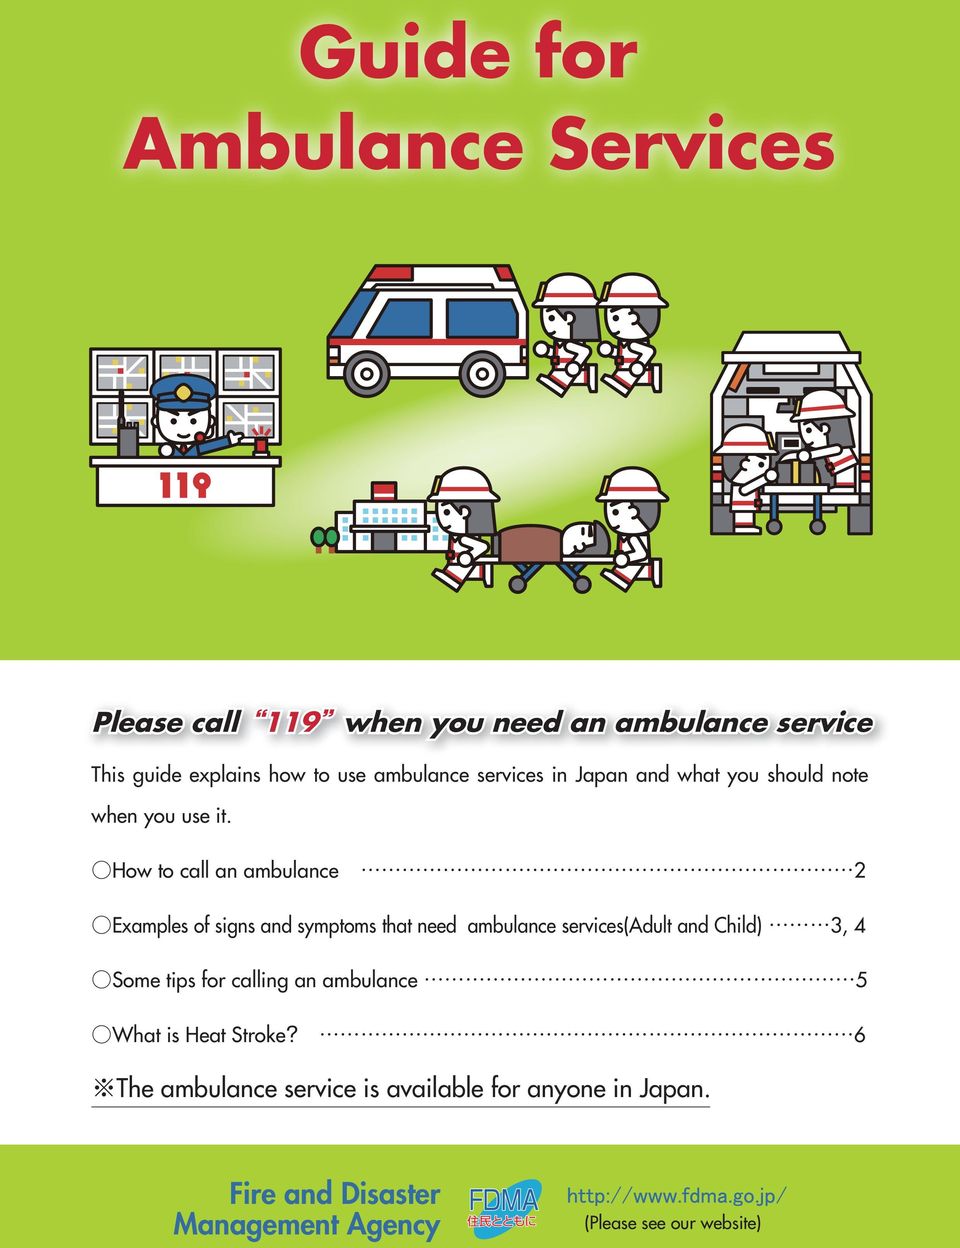 How to call an ambulance 2 Examples of signs and symptoms that need ambulance services(adult and Child) 3, 4 Some